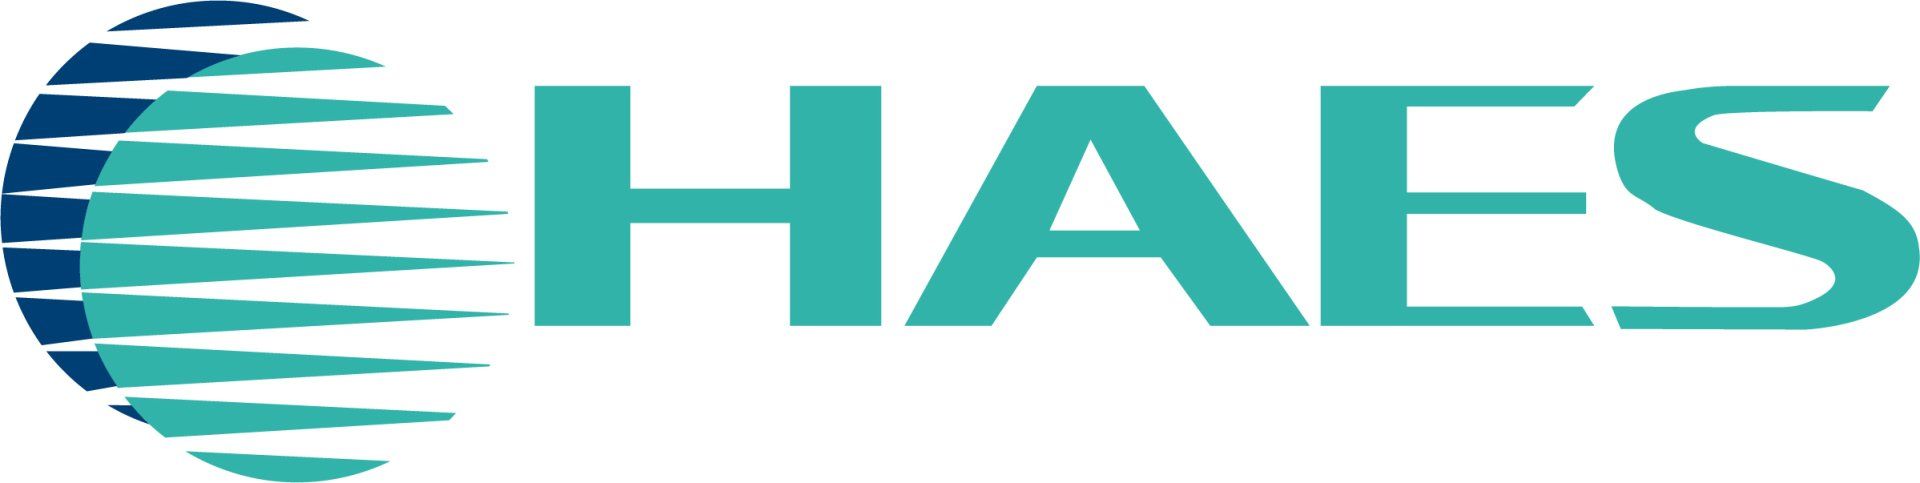 The haes logo is a blue and white logo with a circle in the middle.